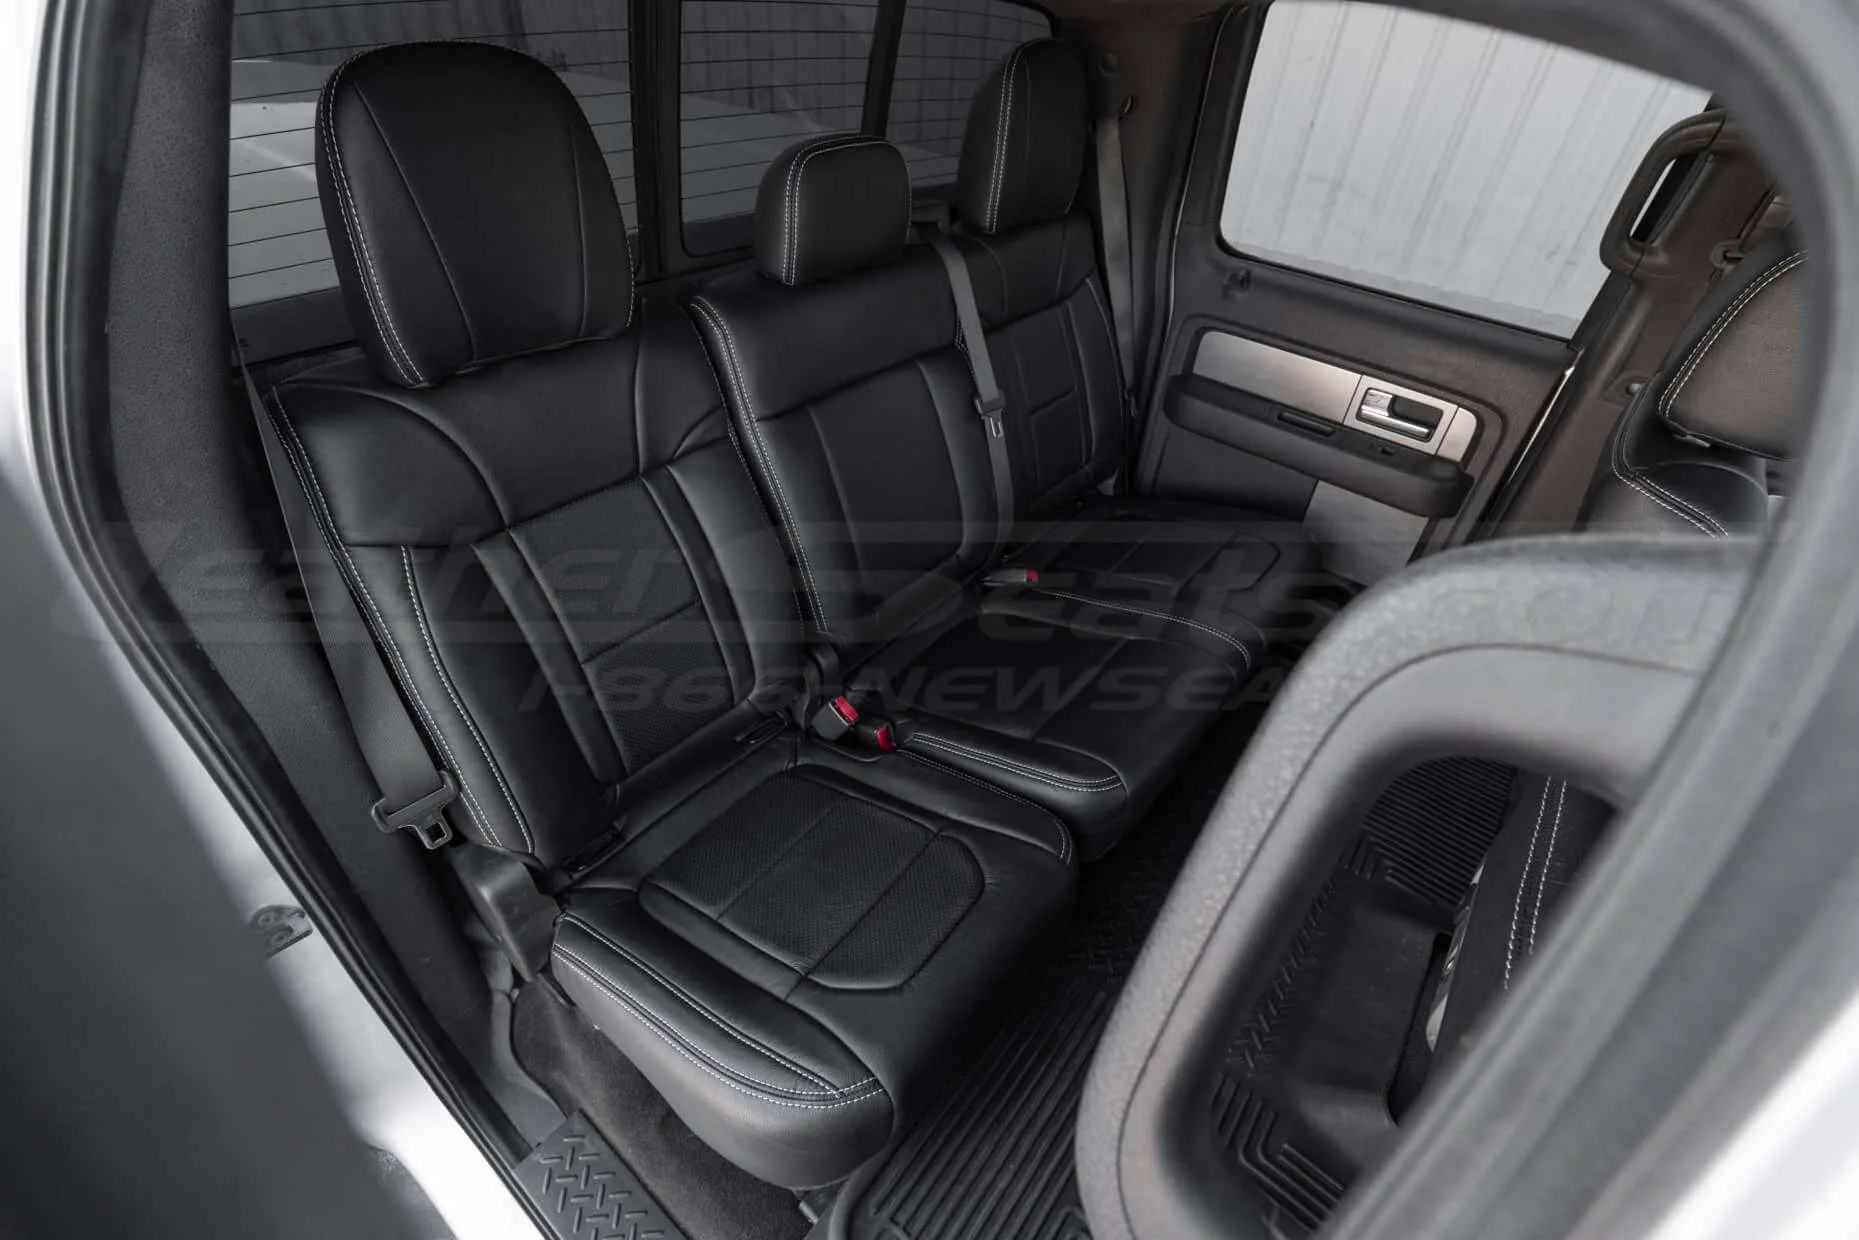 2009-2014 Ford Raptor SuperCrew with custom Black leather seats - Rear seats from passenger side